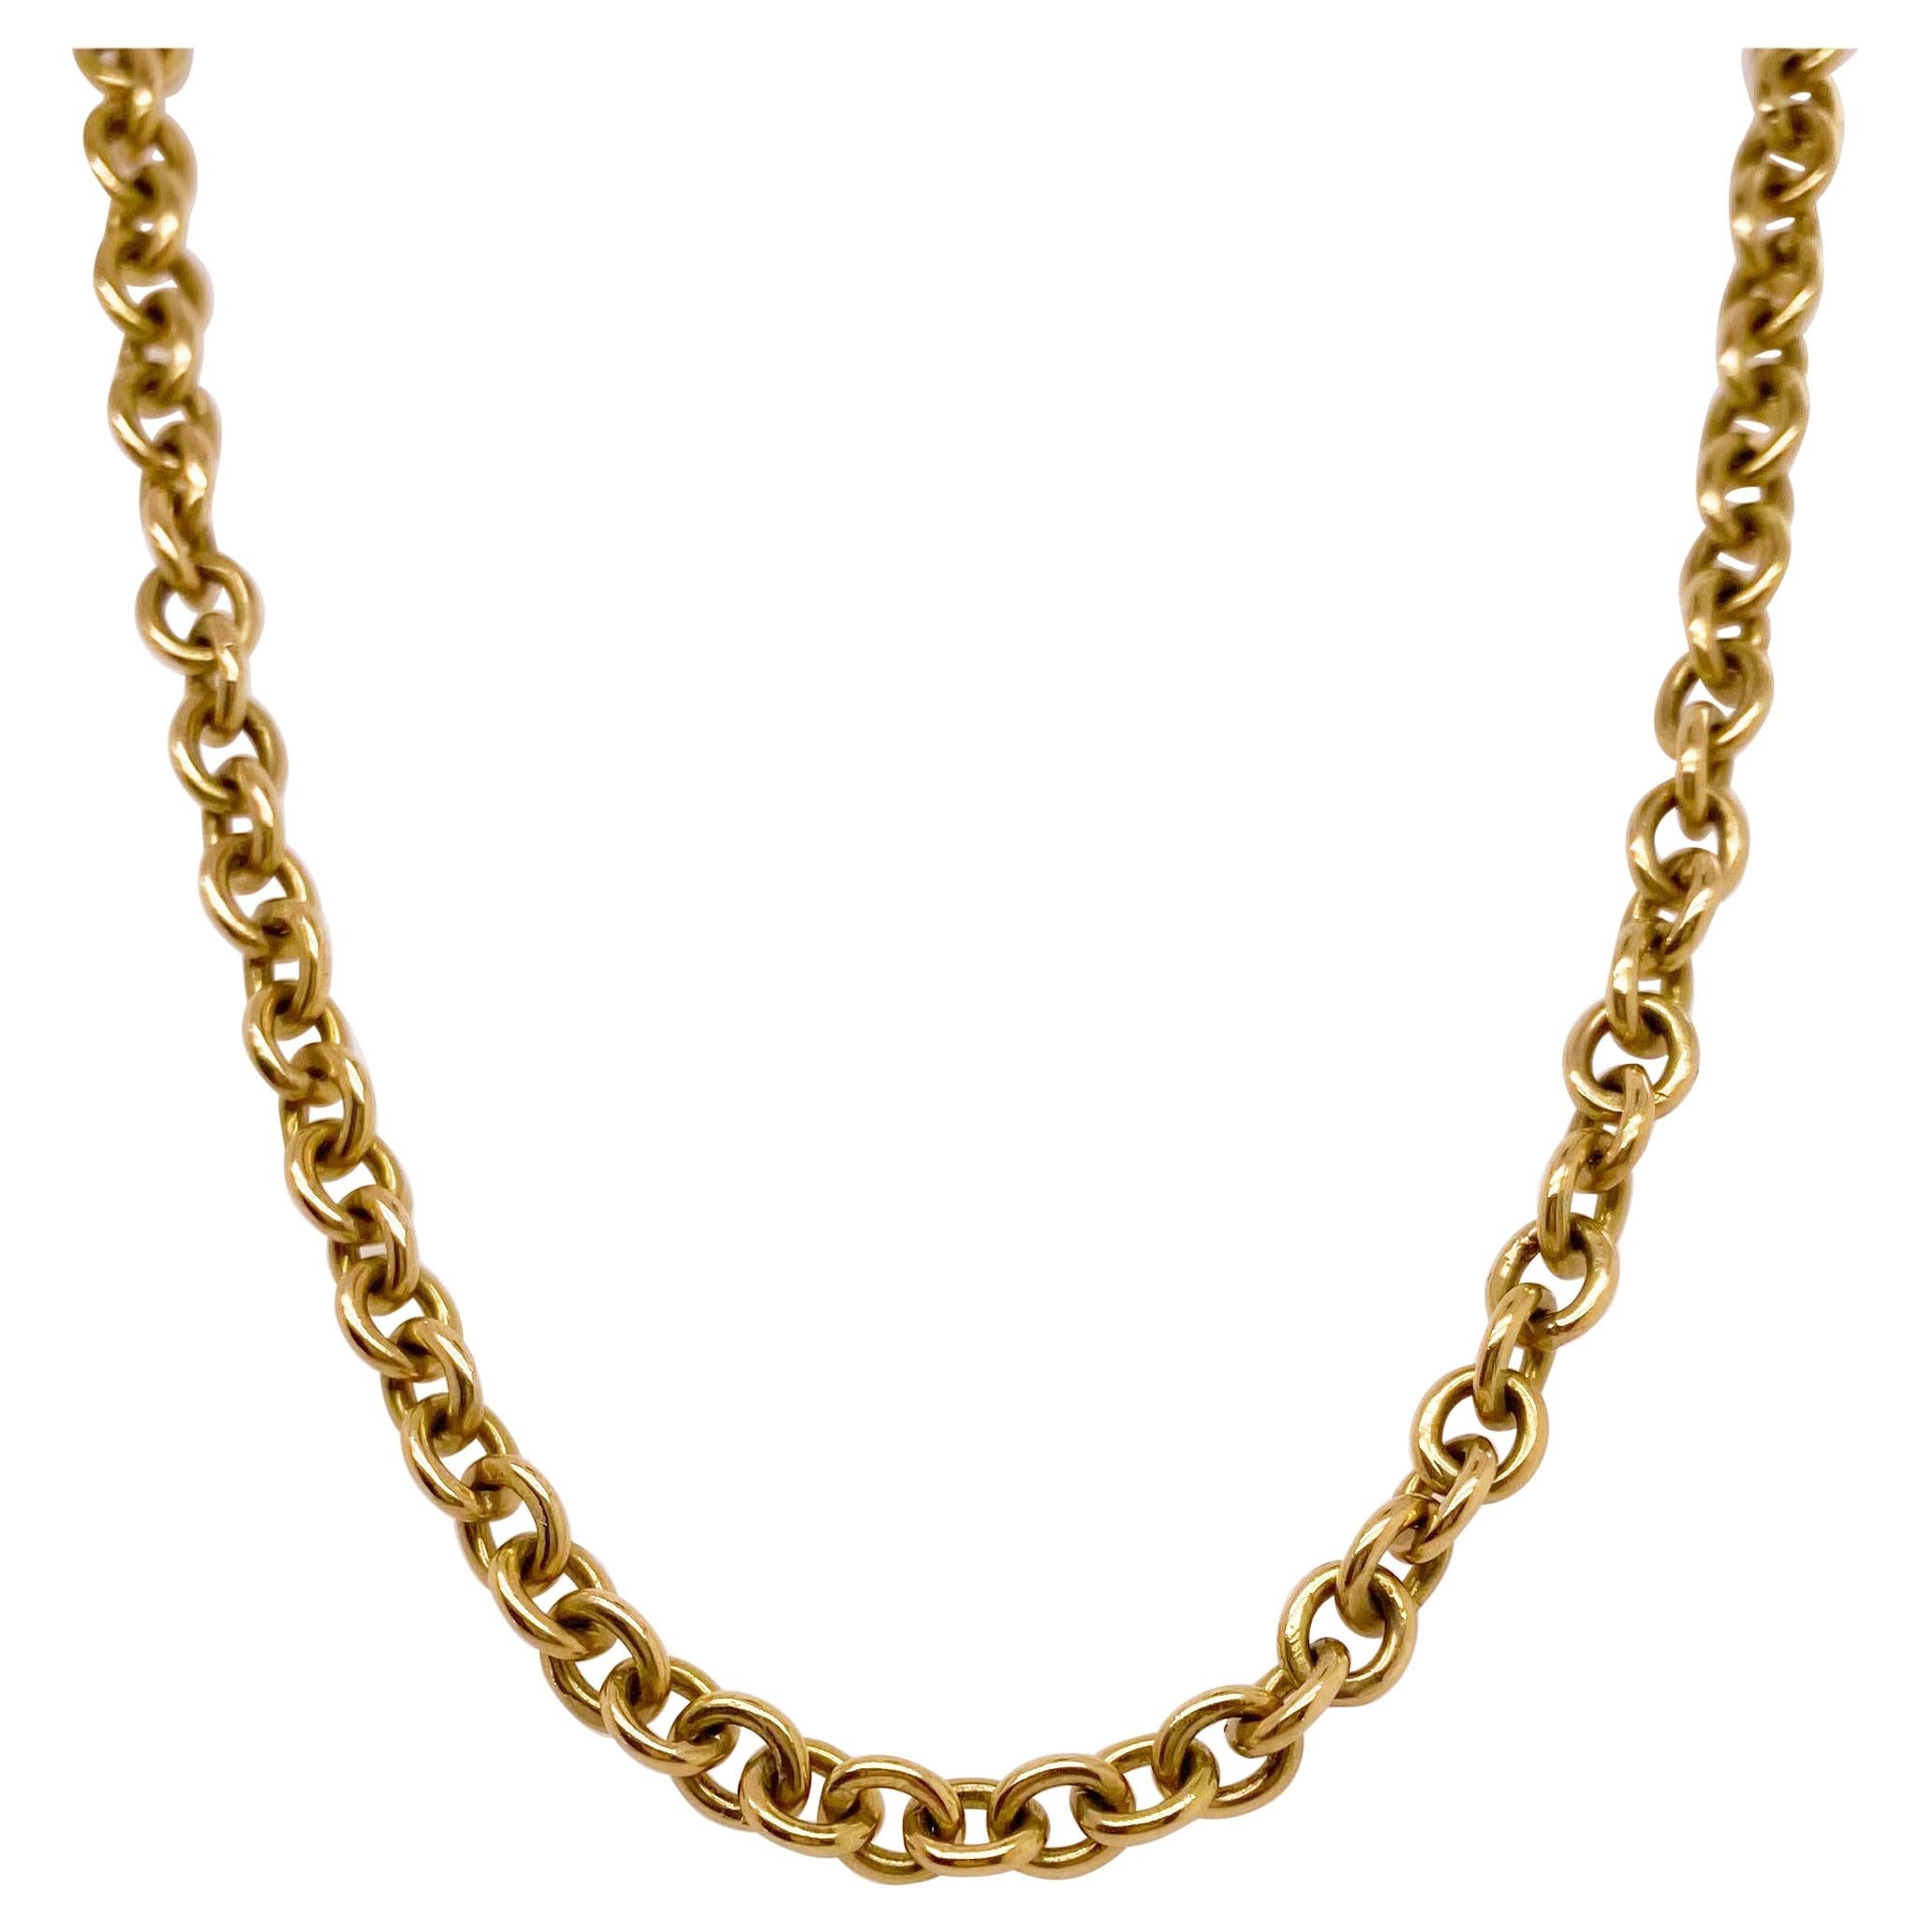 Large Cable Chain 14k Gold, Gold Cable Chain, Unisex